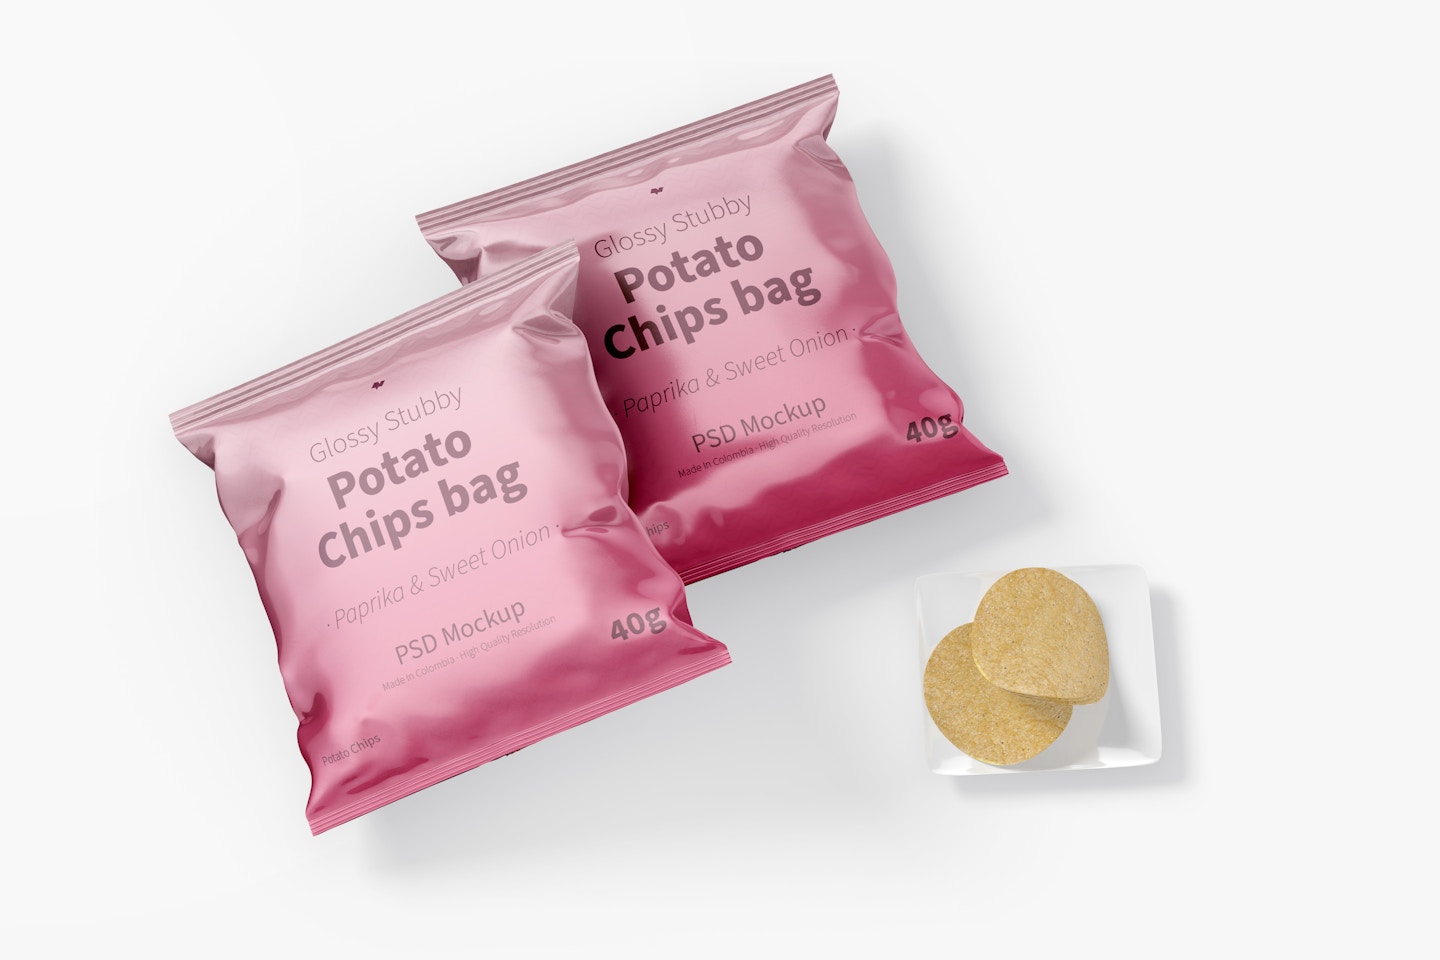 Glossy Stubby Chips Bag Mockup, Top View